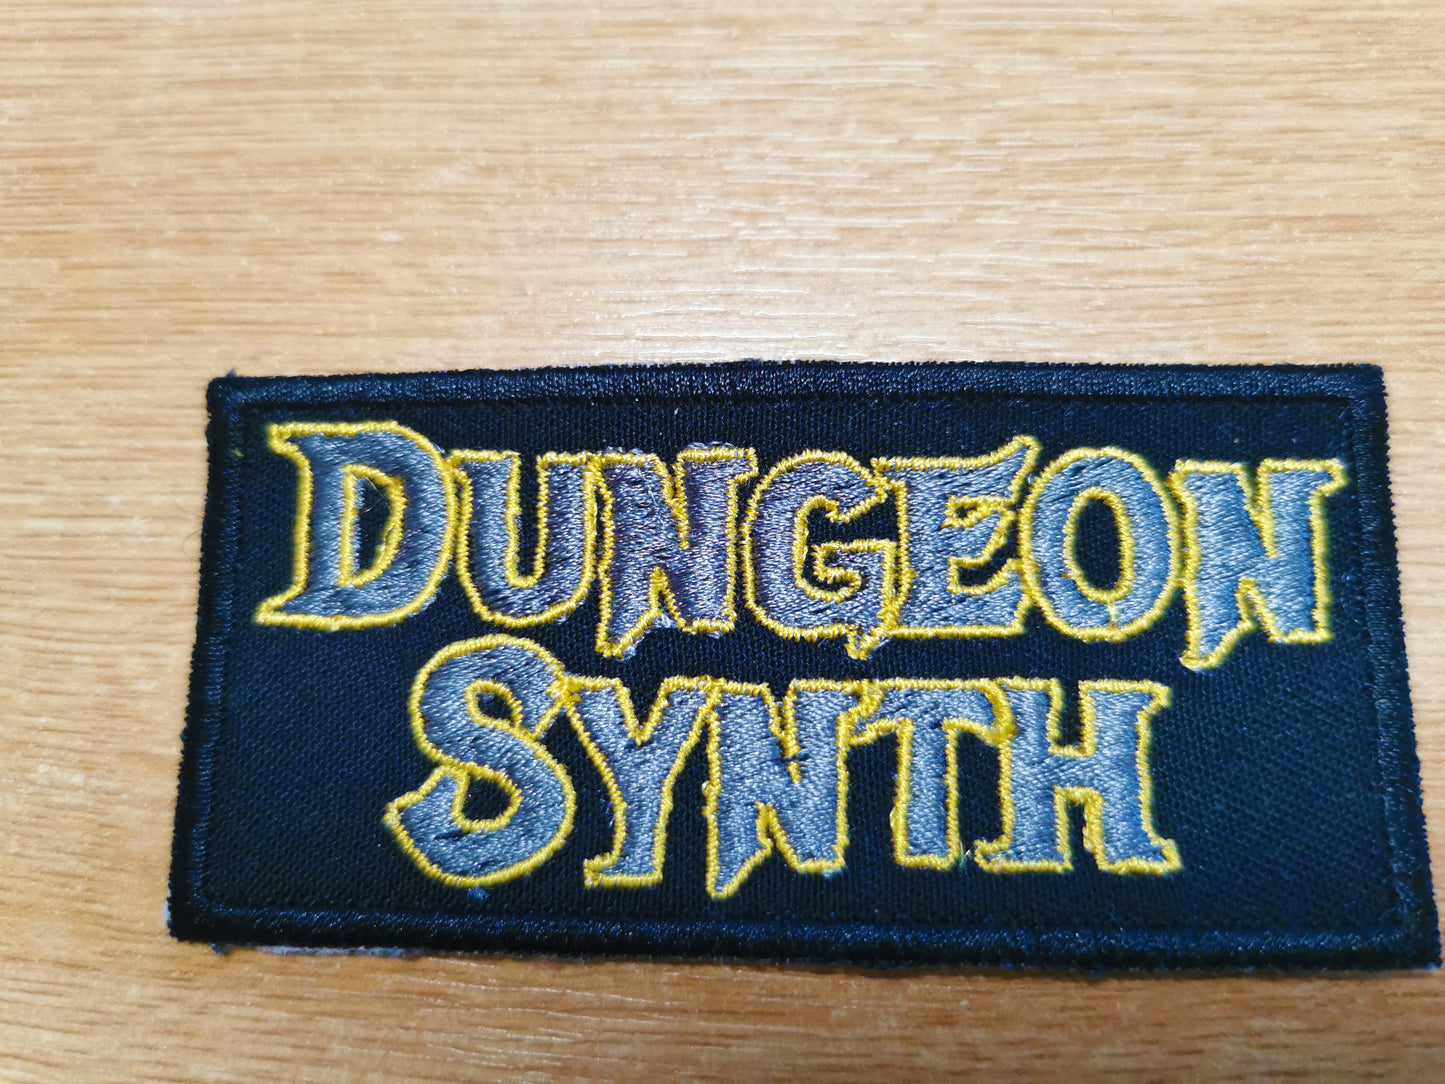 Dungeon Synth Embroidered Patch Gold and Pewter